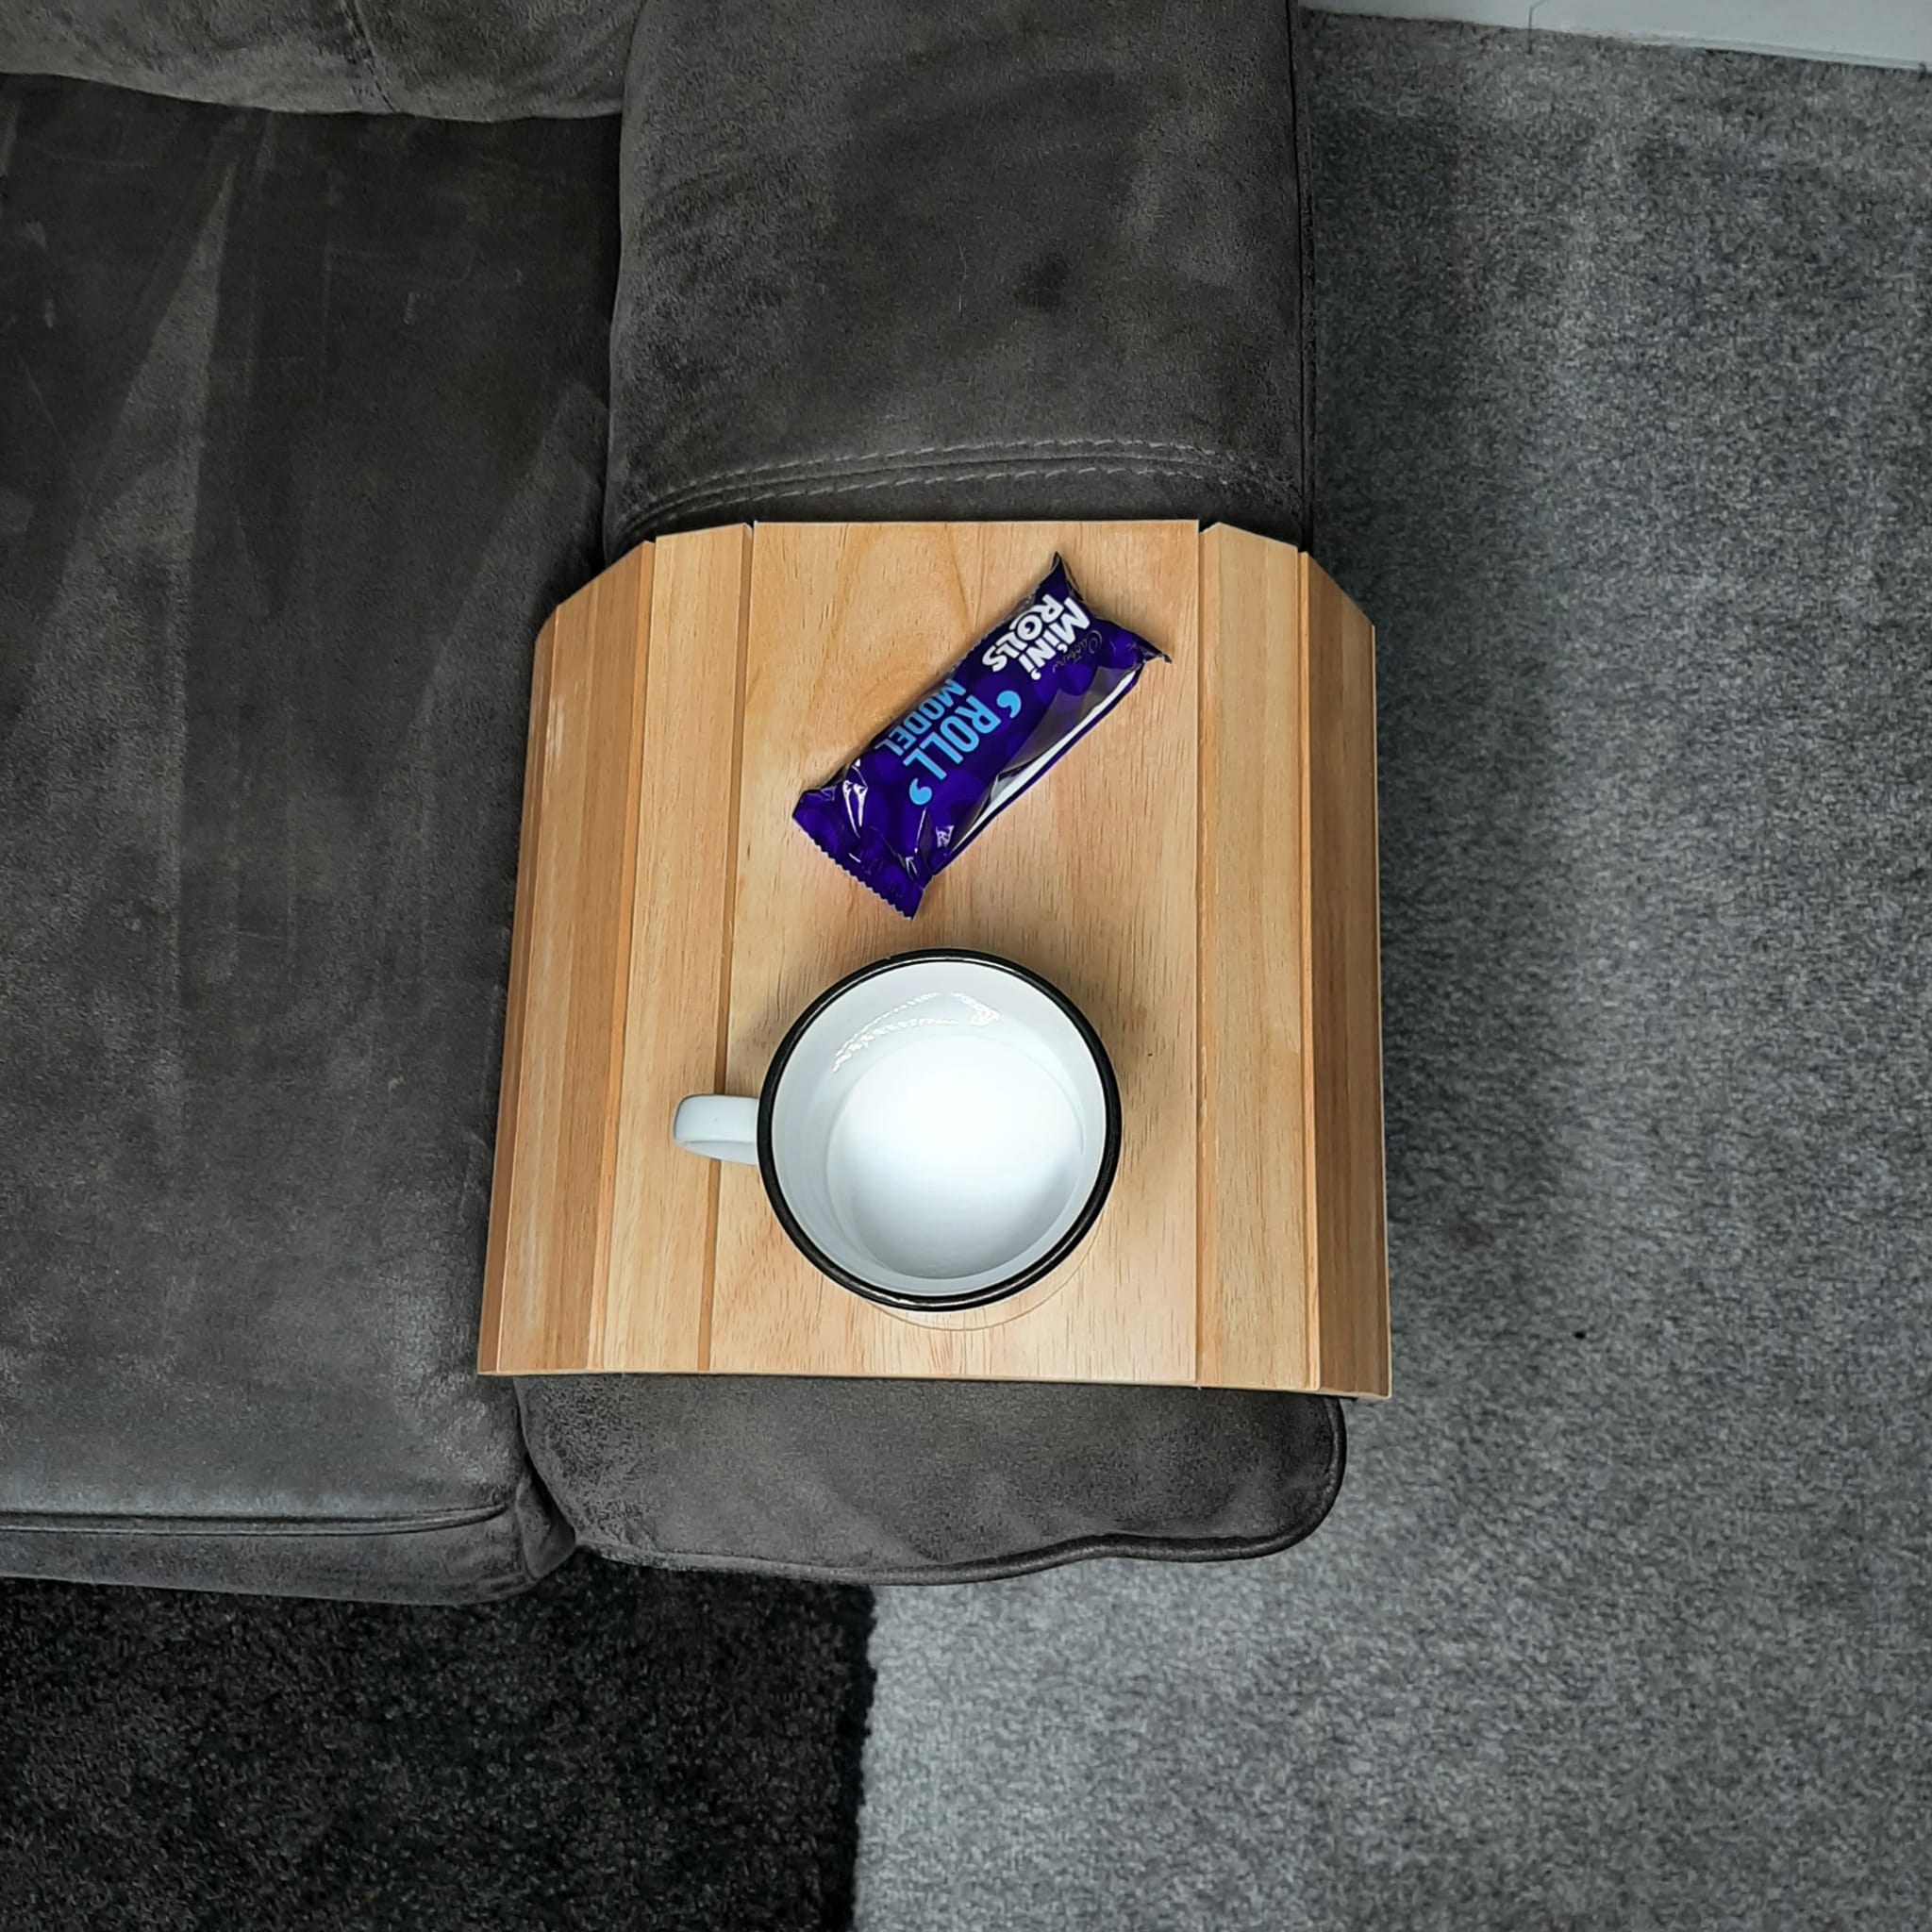 Wooden sofa arm tray with recess Blank with cup and chocolate to show use